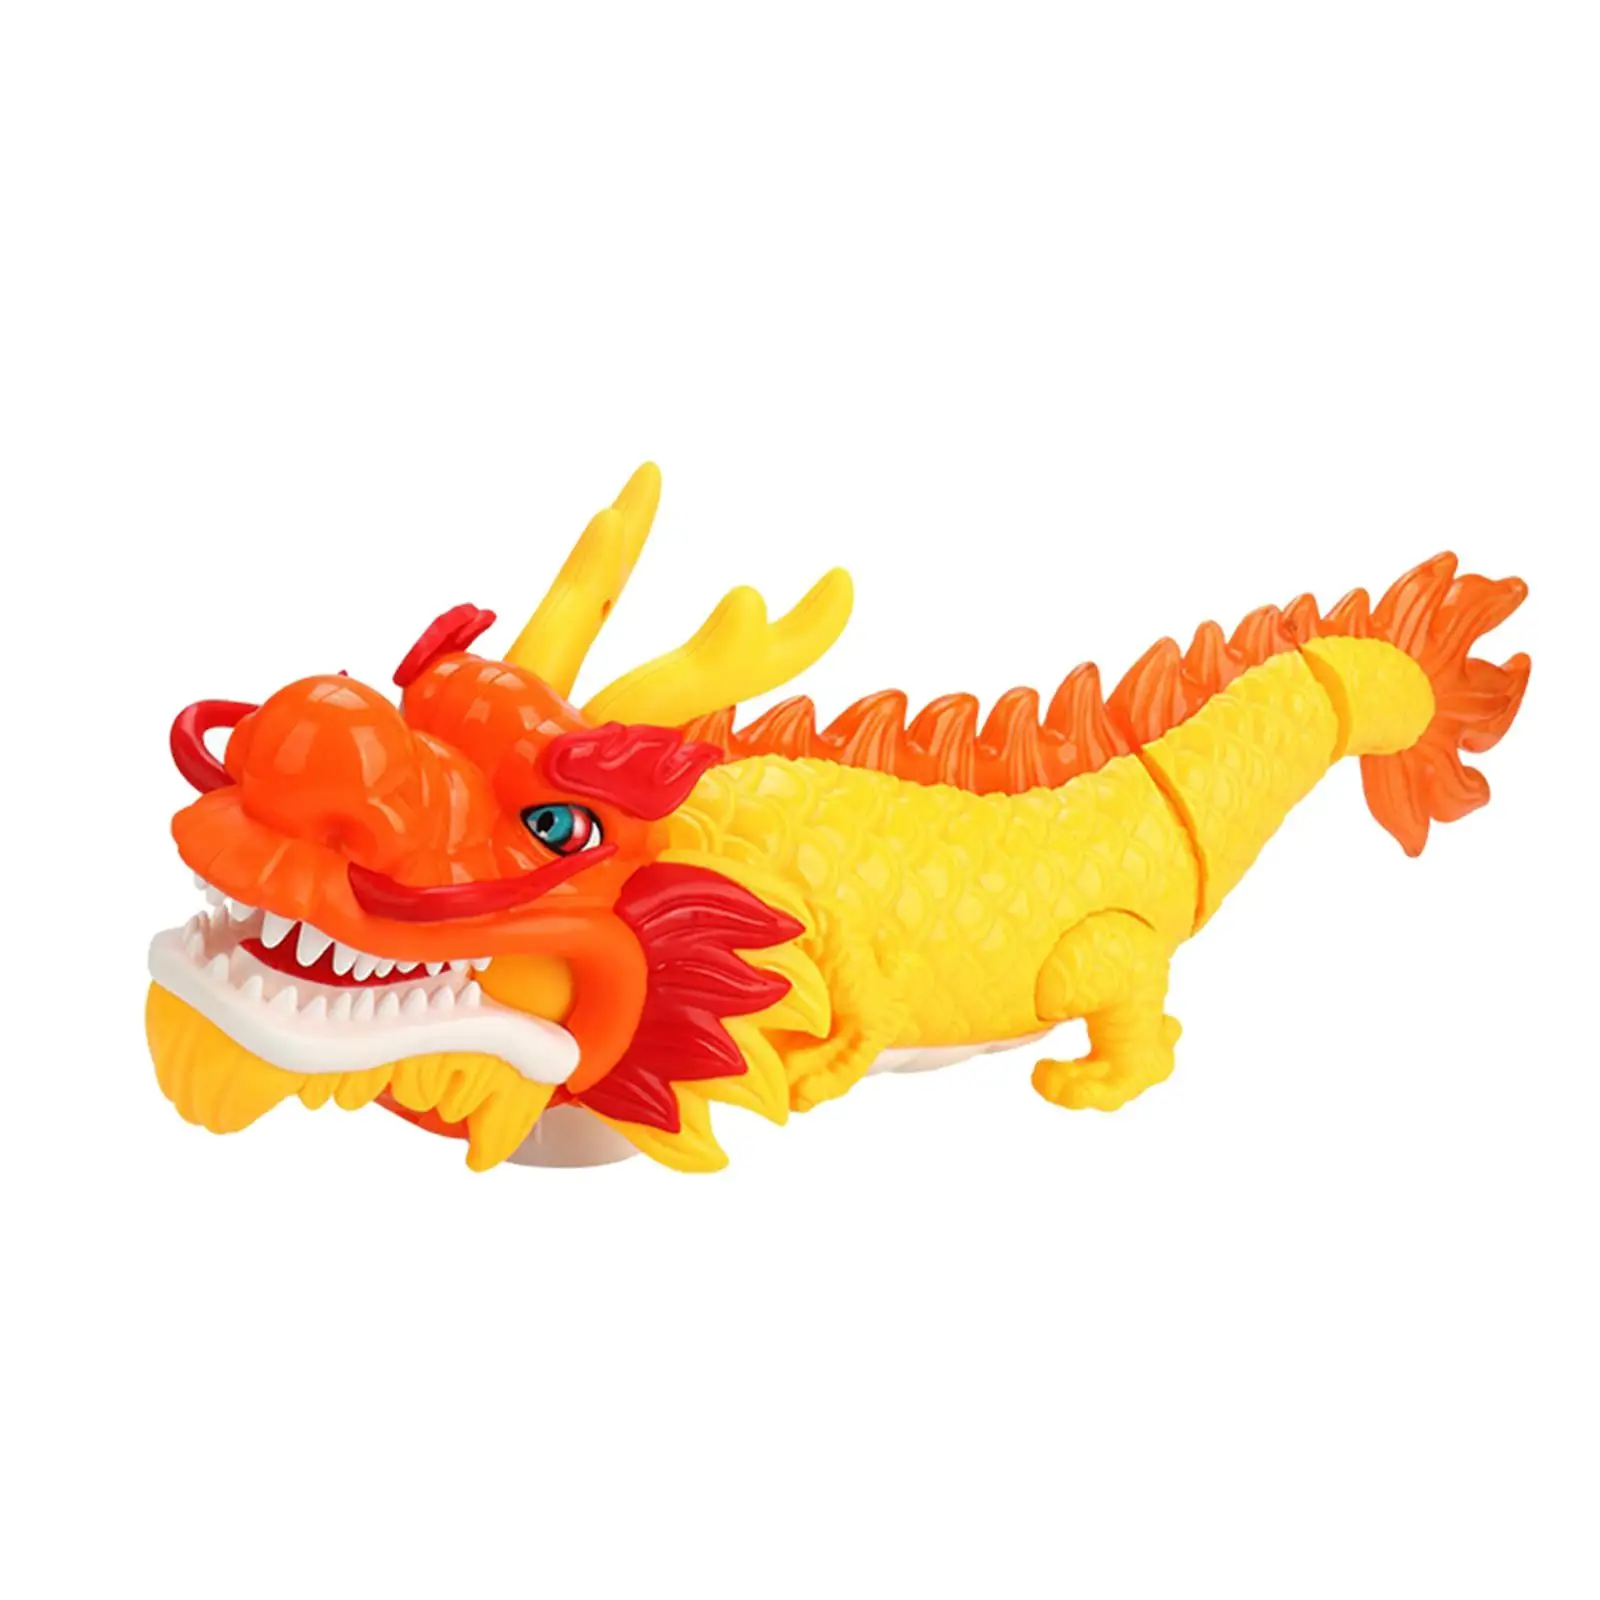 Eletric Dragon Toy Walking Gifts Outdoor Realistic Mechanical Creative Animal Flexible for Girls Children Boys Kid Age 8-12